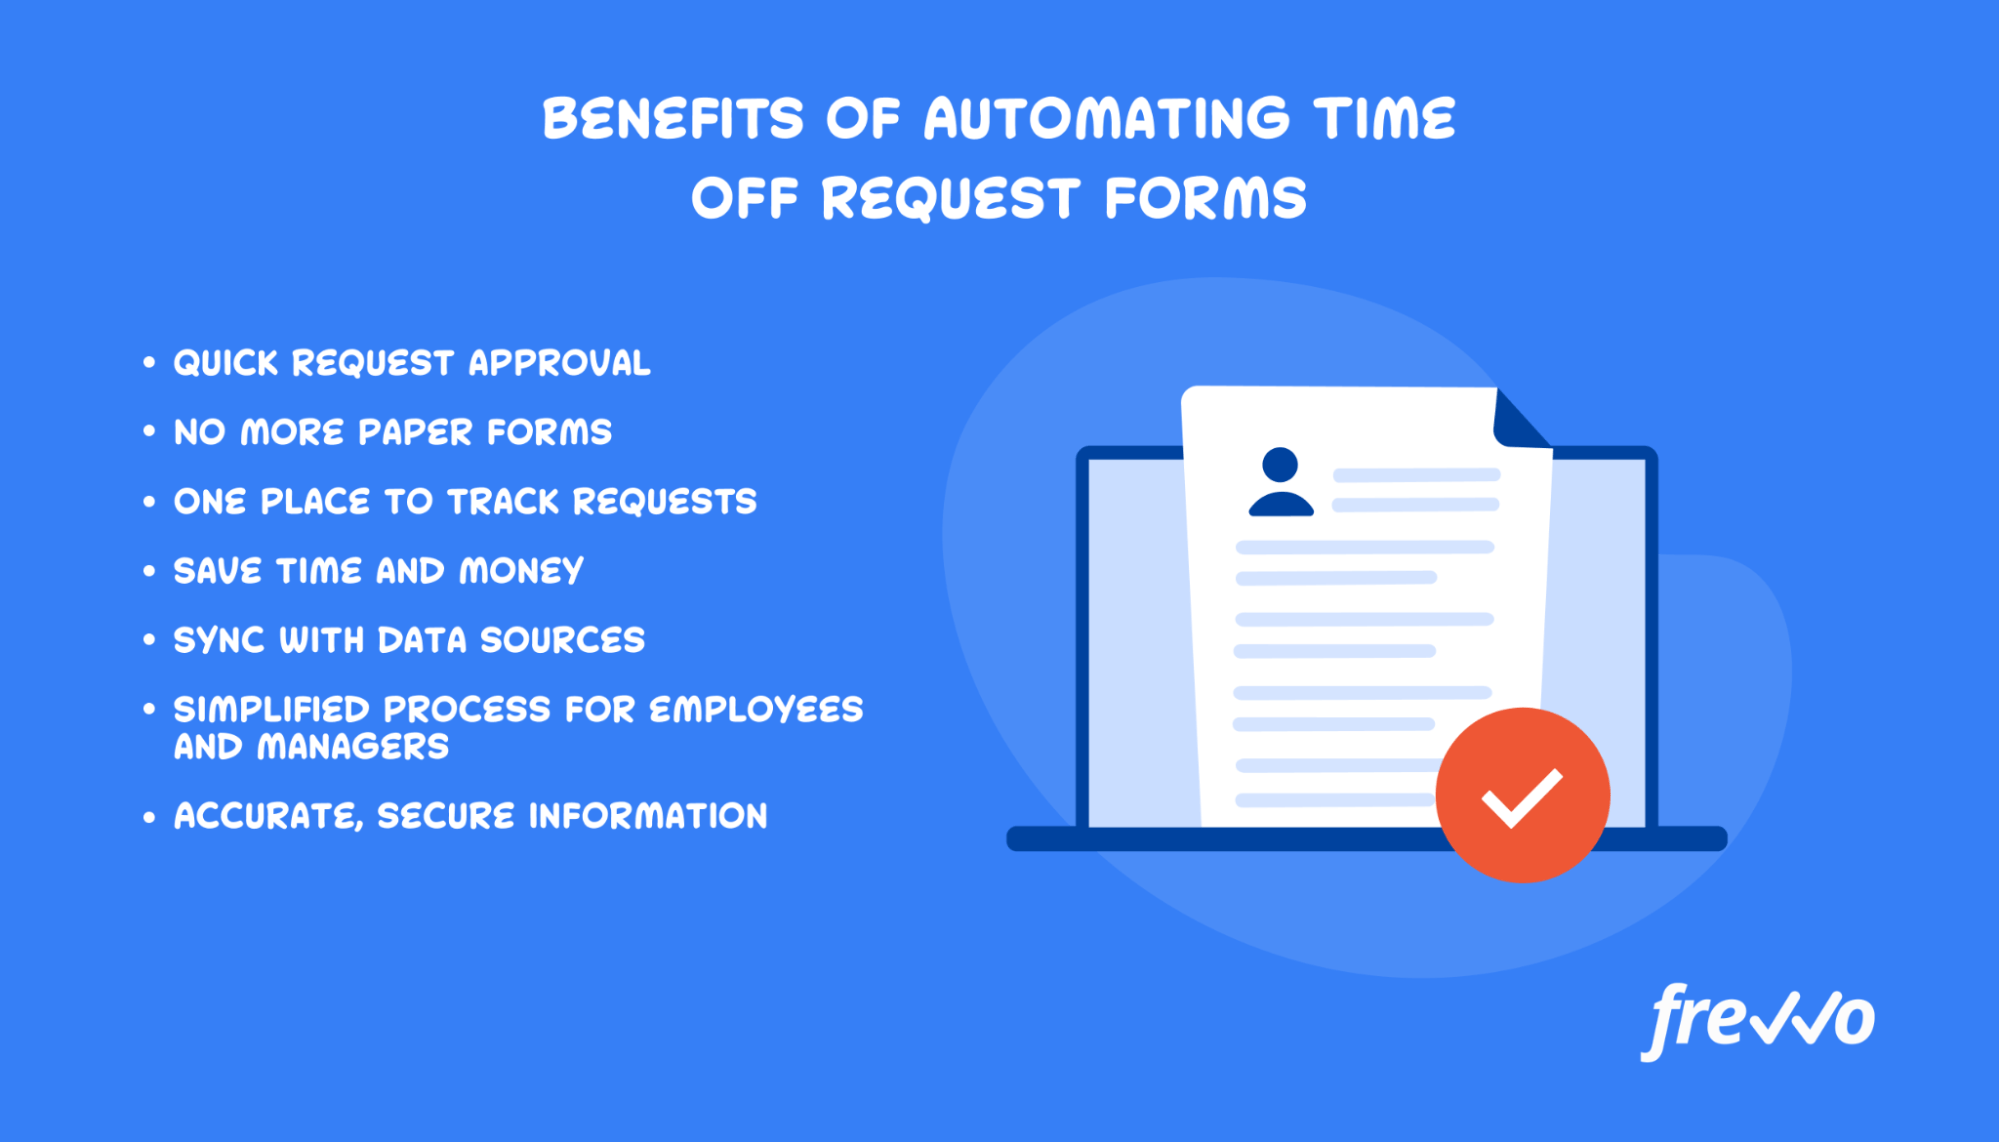 image showing the benefits of time off request forms